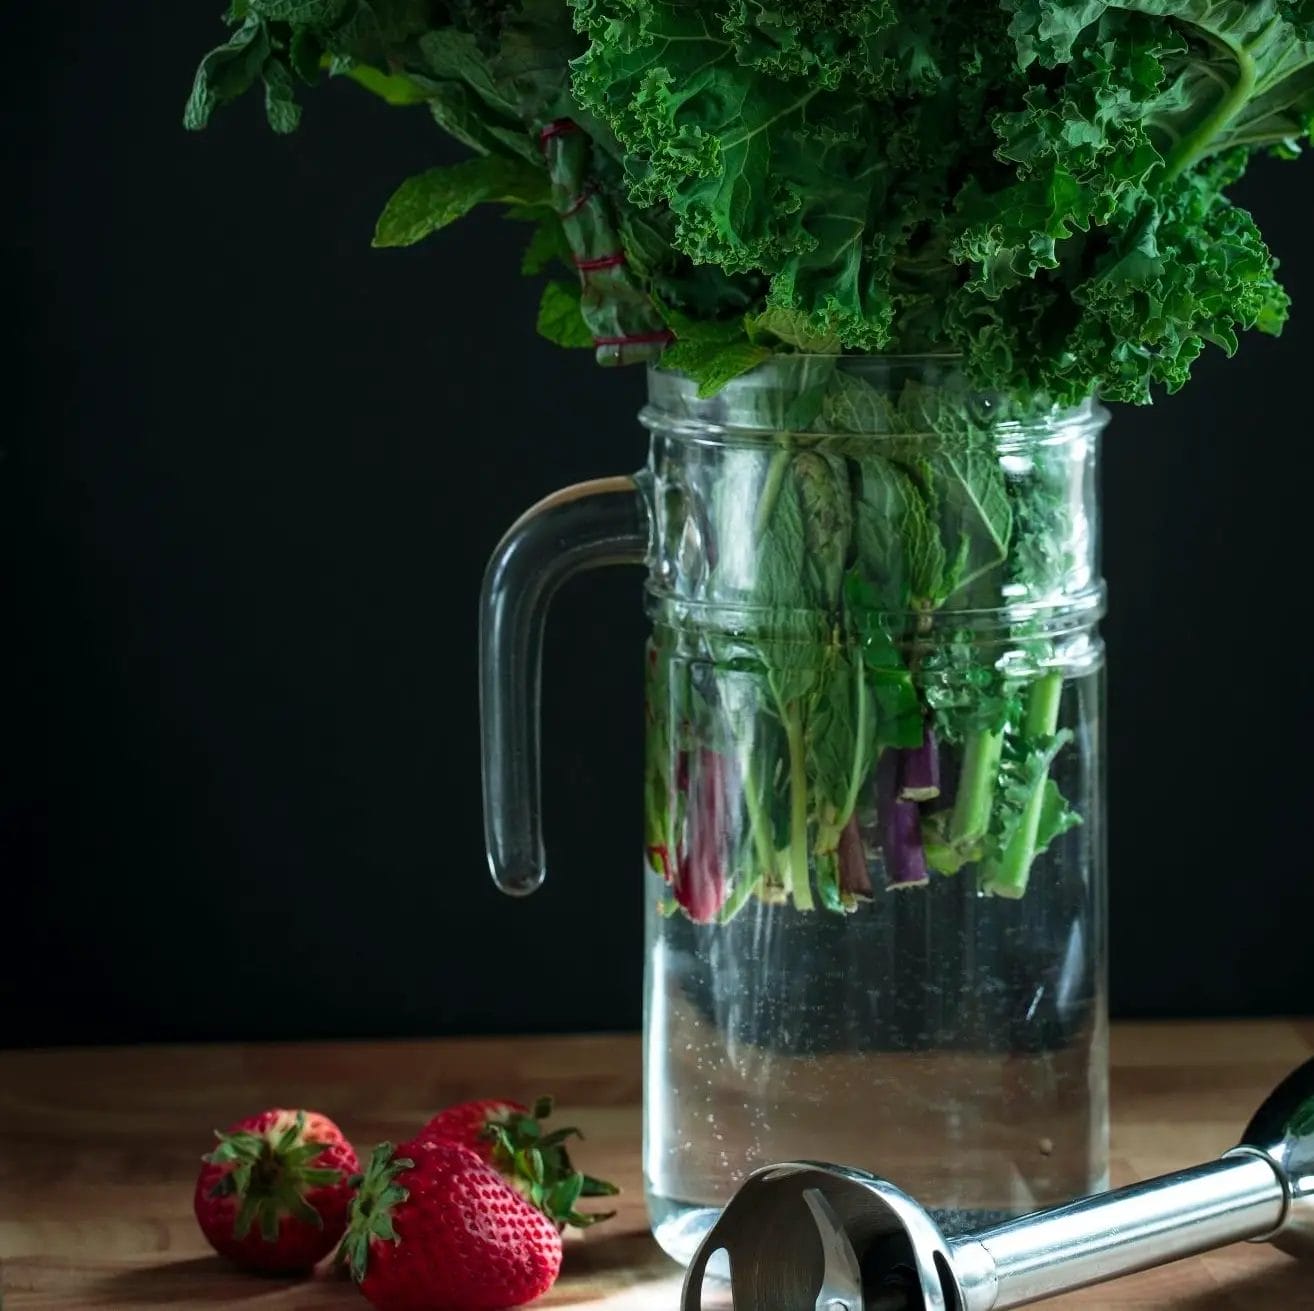 Things to look for in an immersion blender